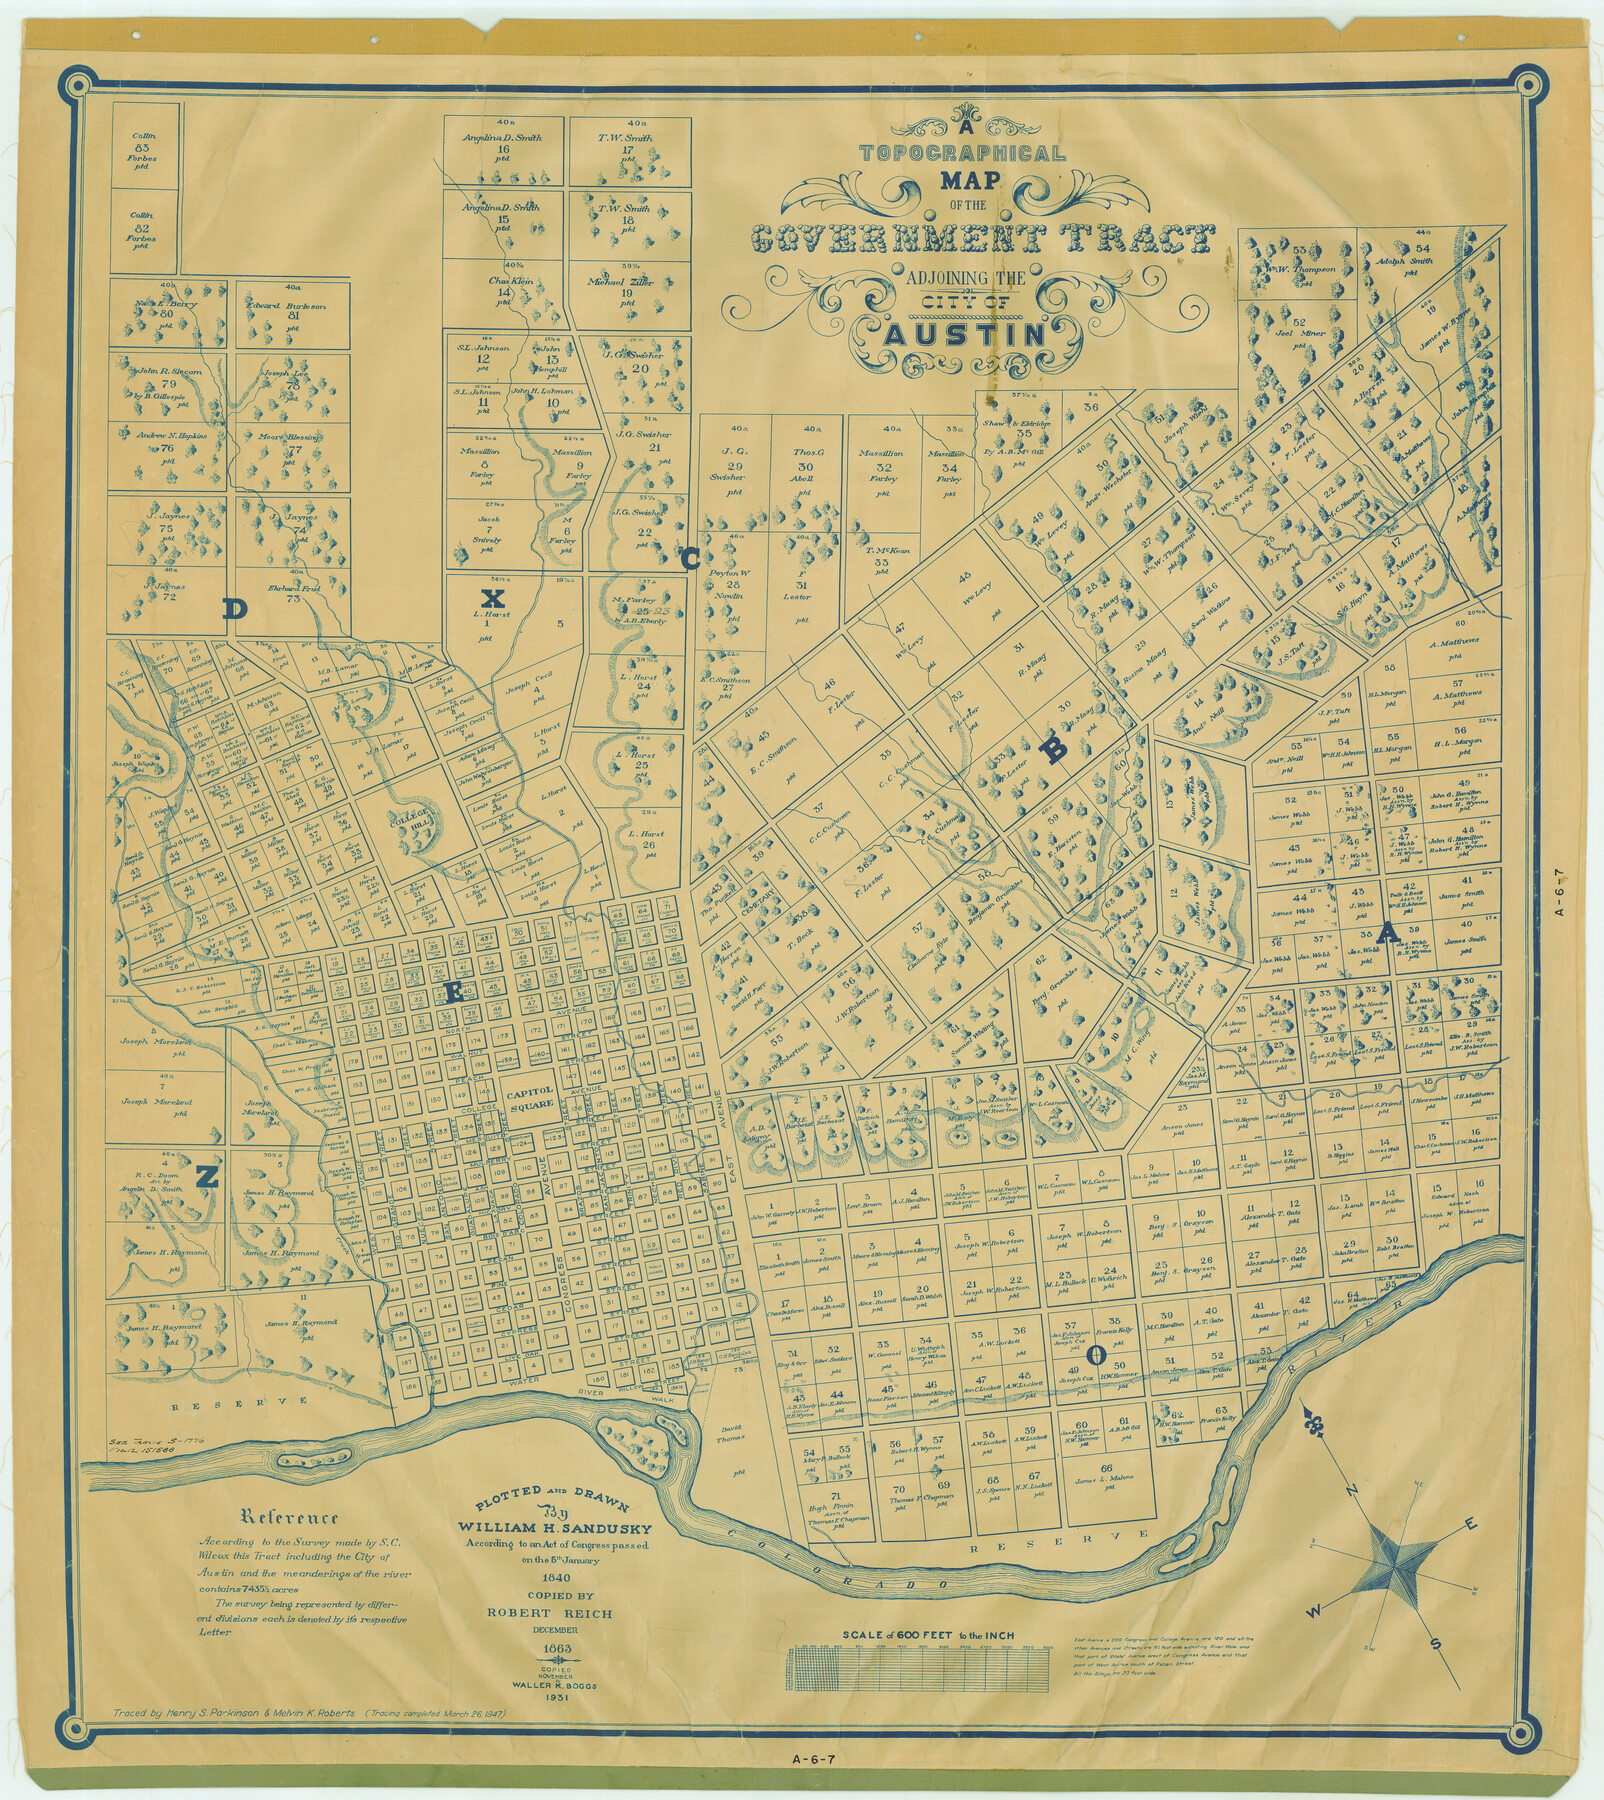 4842, A Topographical Map of the Government Tract Adjoining the City of Austin, General Map Collection